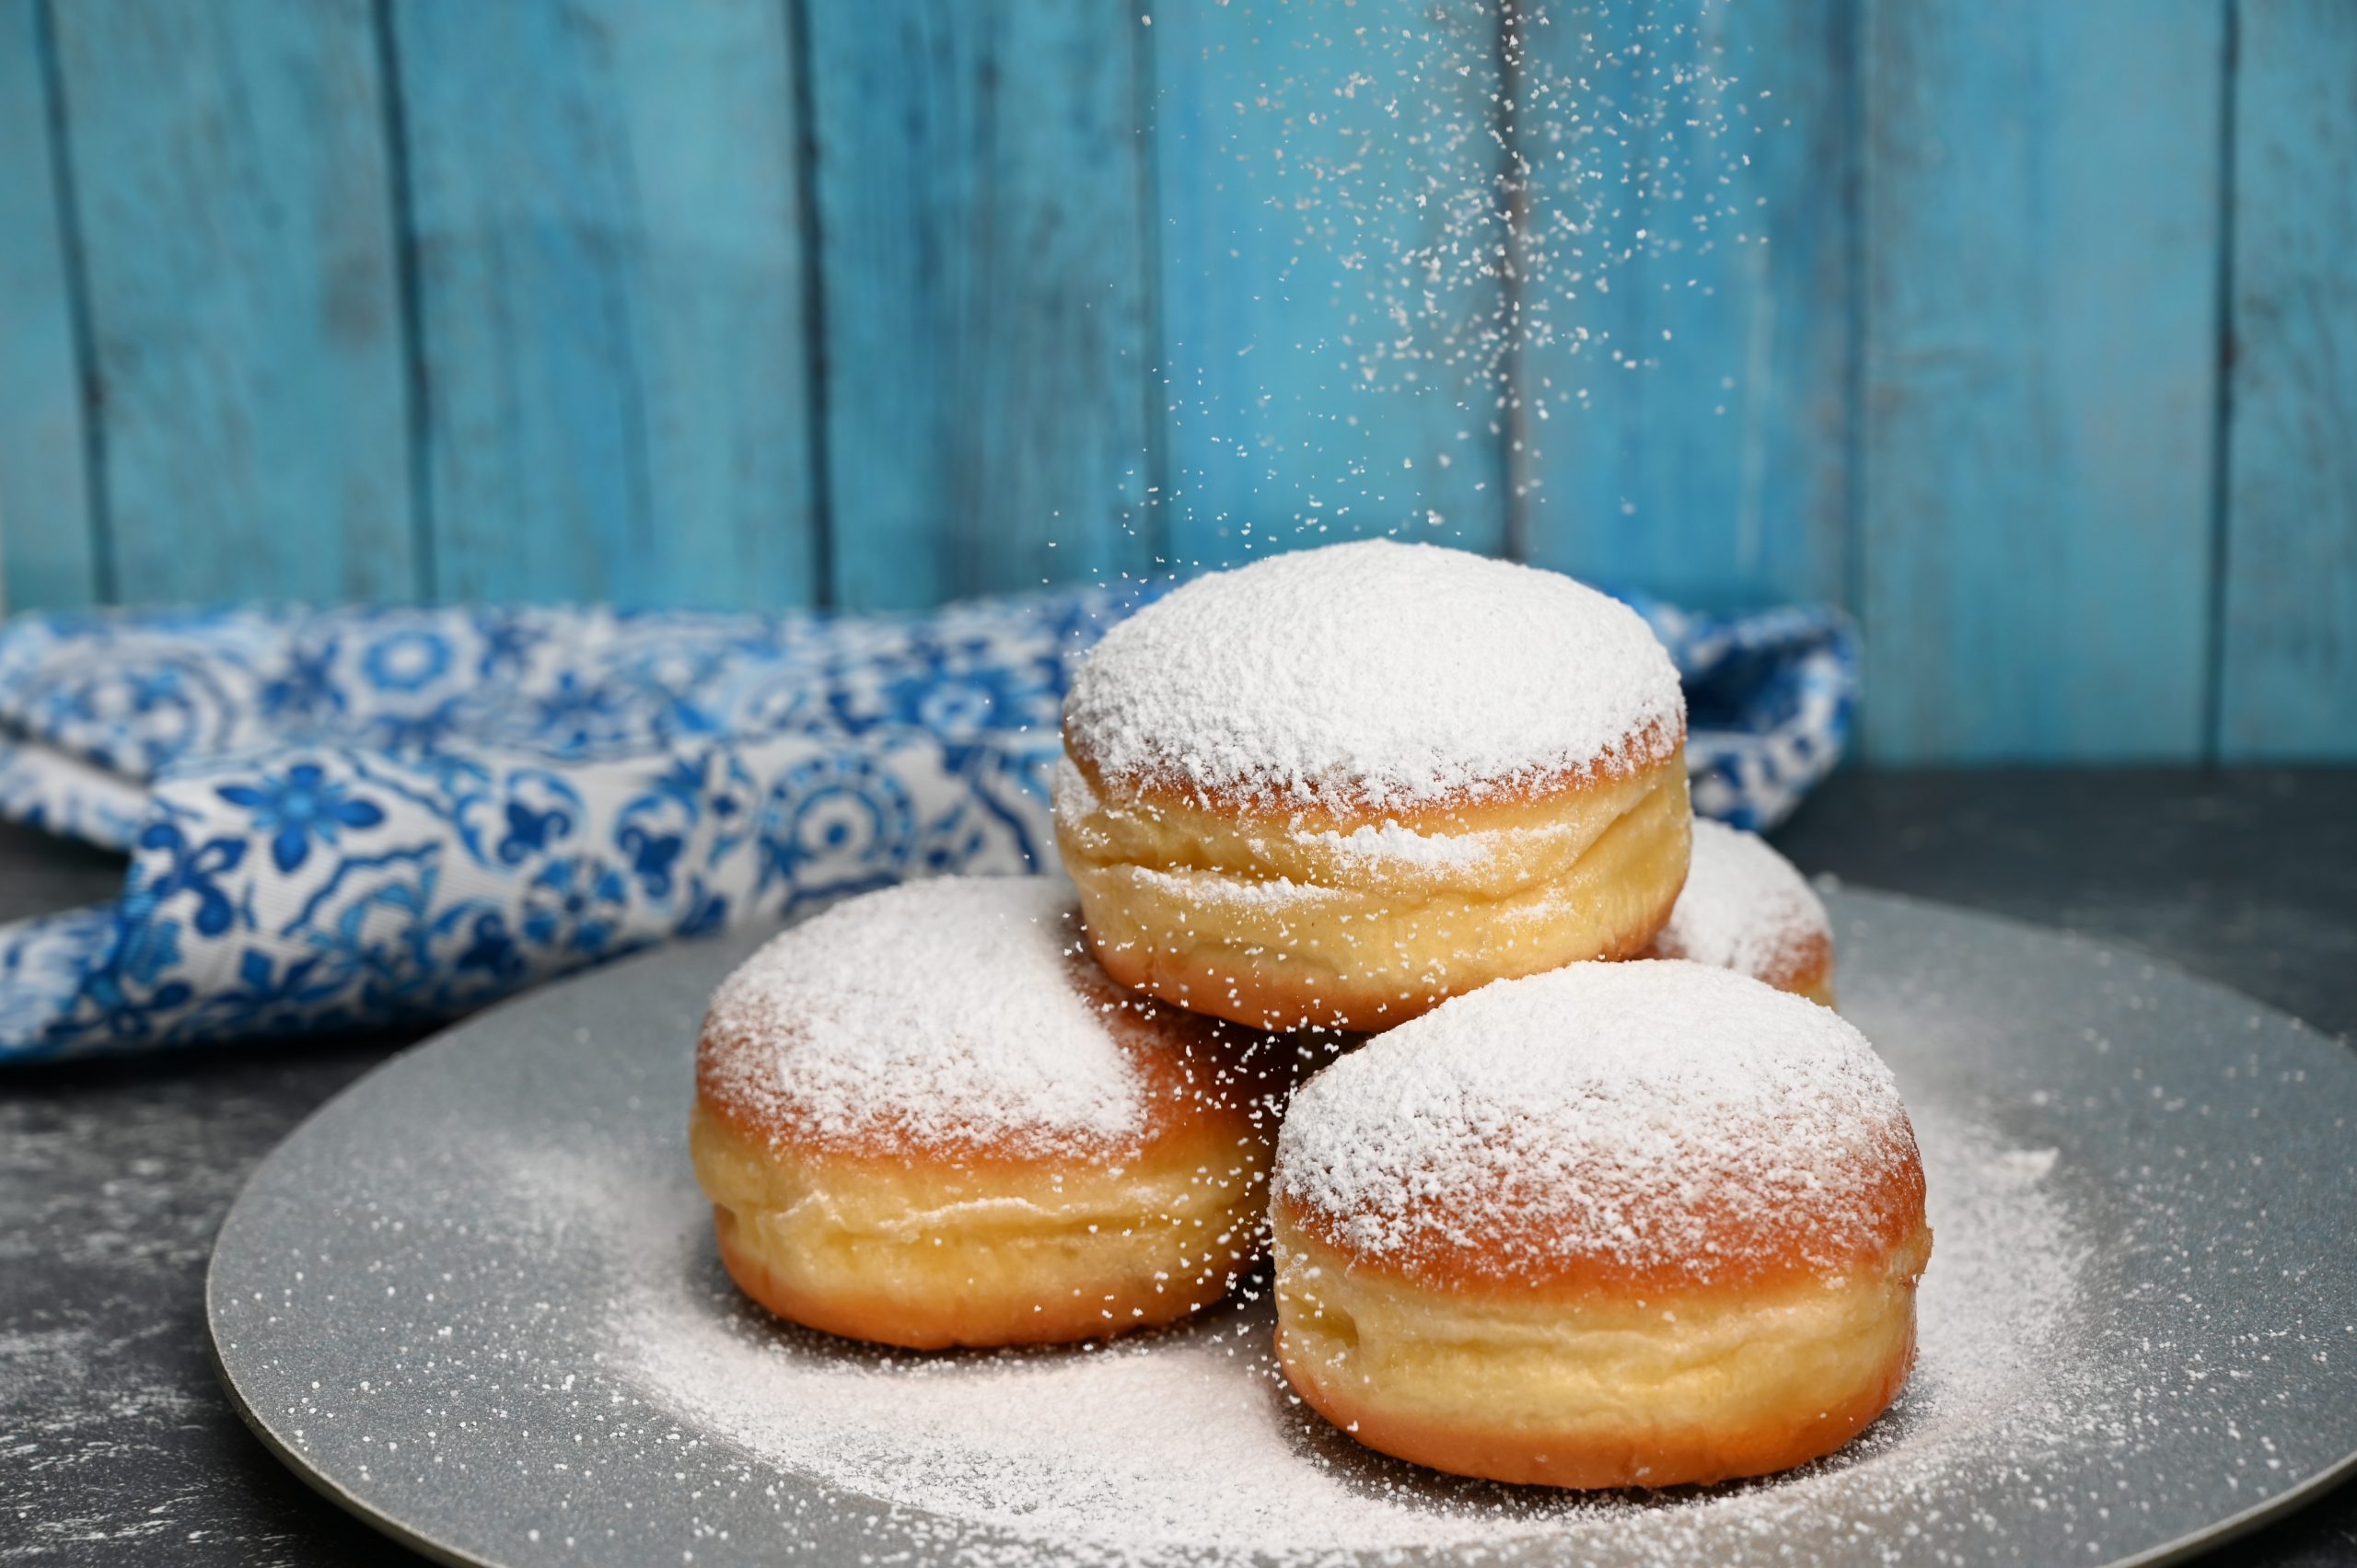 Farsang Doughnuts – The Final Taste of Last Year – with Recipe!